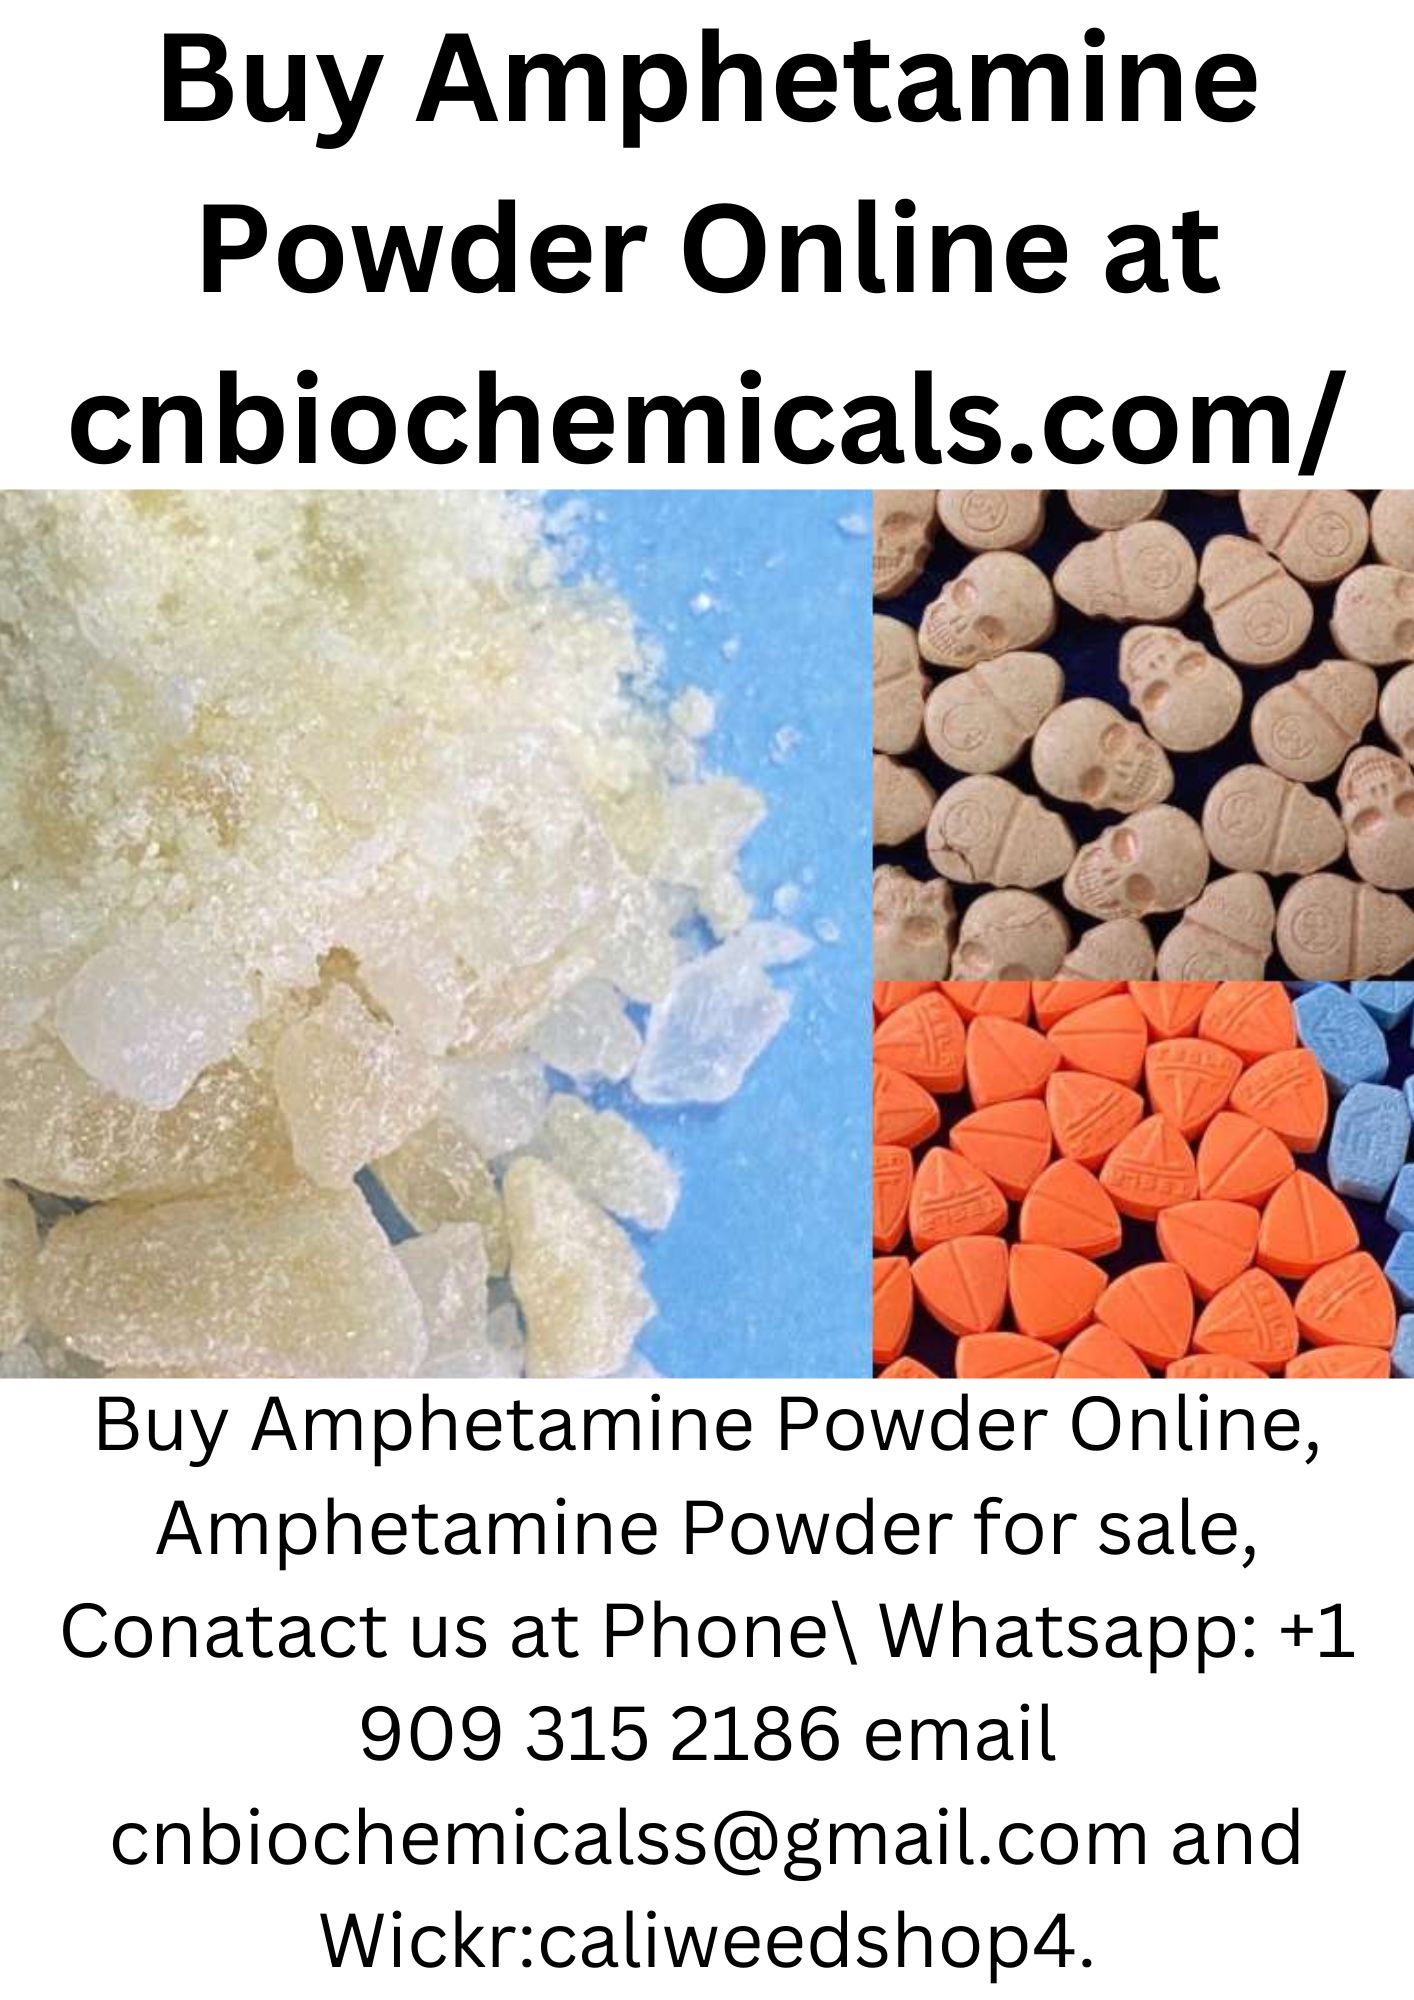 Buy Cocaine Cas 50362 Online PhoneWhatsapp 1 904 796 80 - Indiana - Indianapolis ID1547549